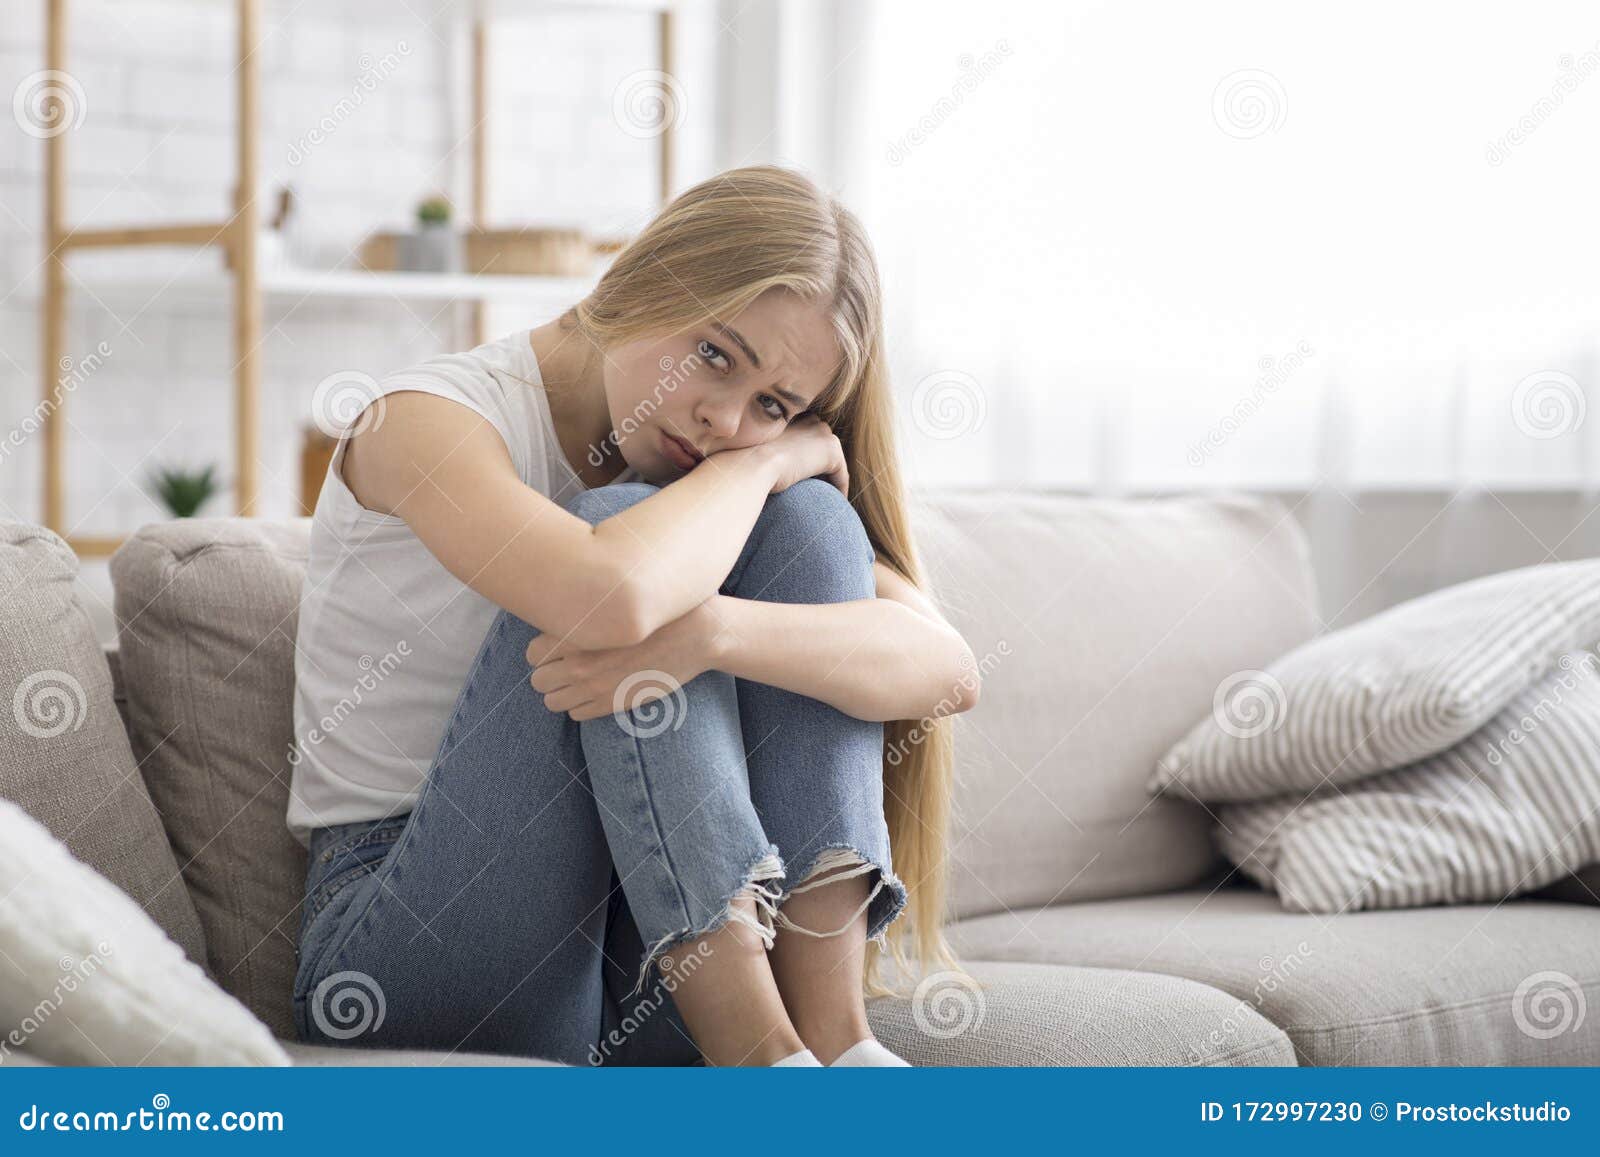 Lonely Sad Girl Sitting on Couch at Home Alone Stock Photo - Image ...